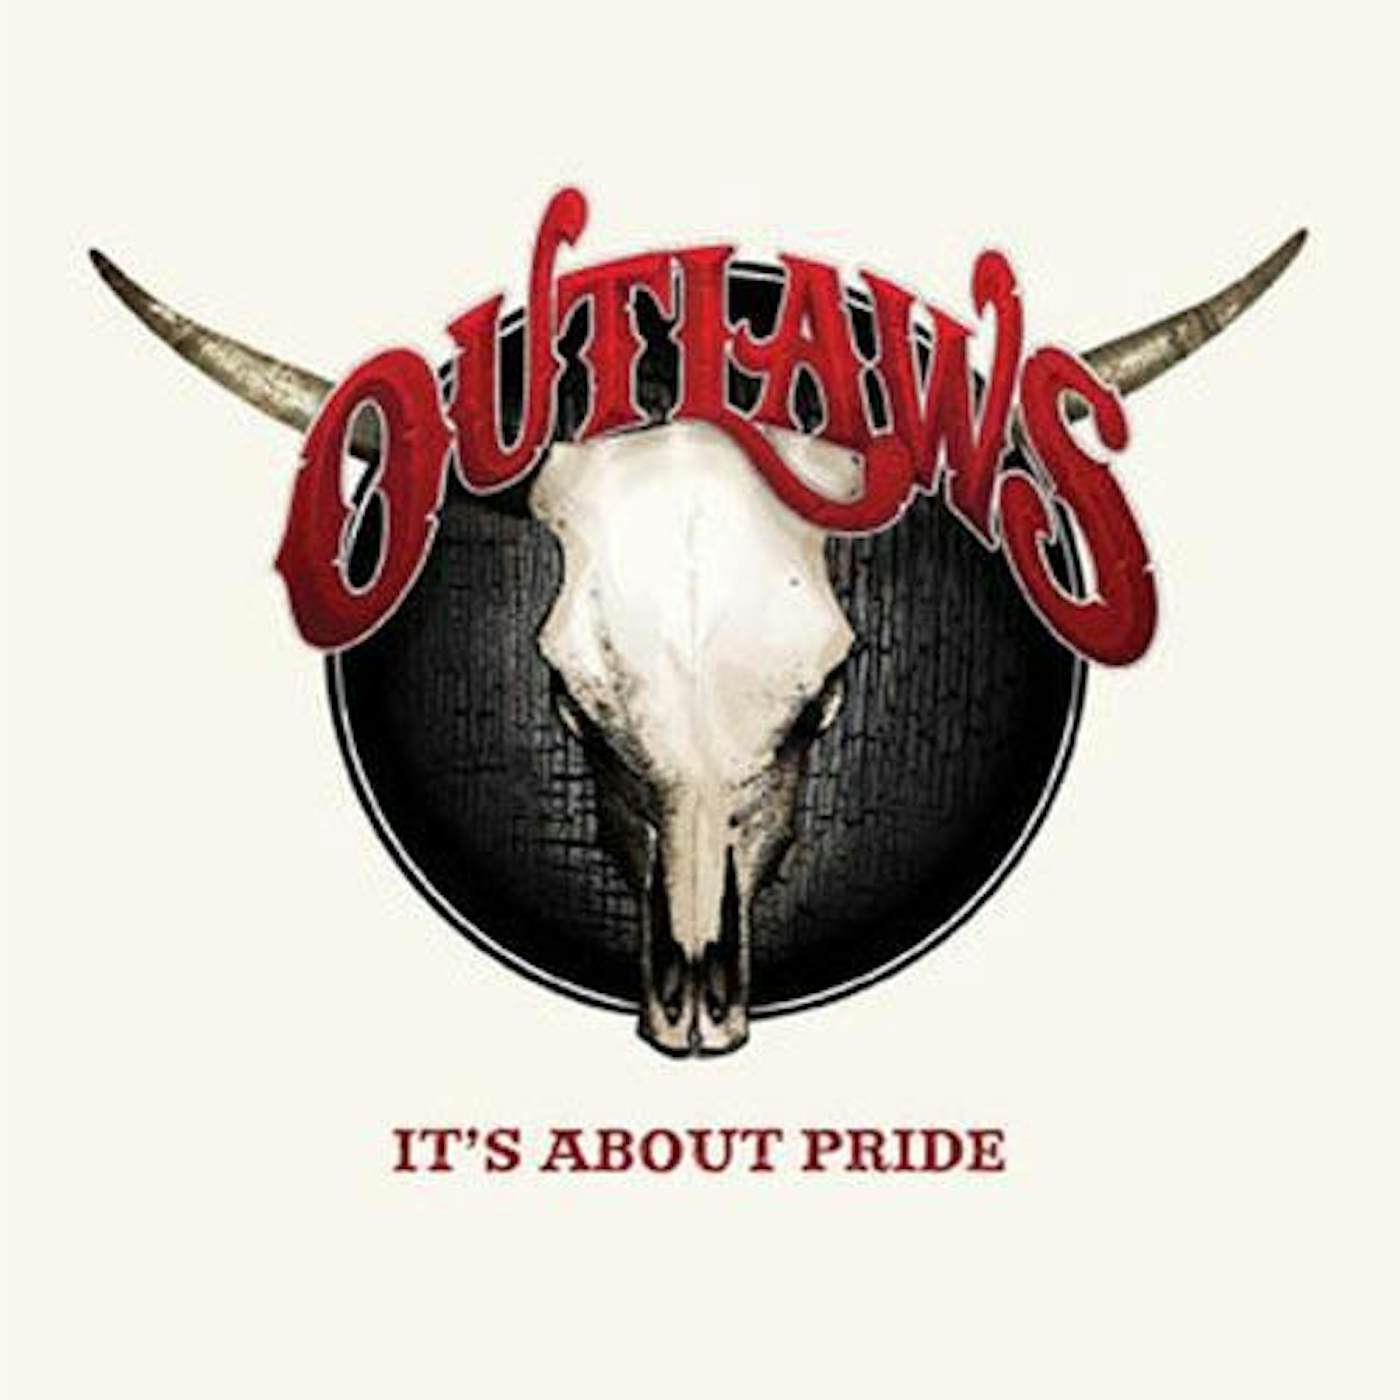 Outlaws IT'S ABOUT PRIDE CD